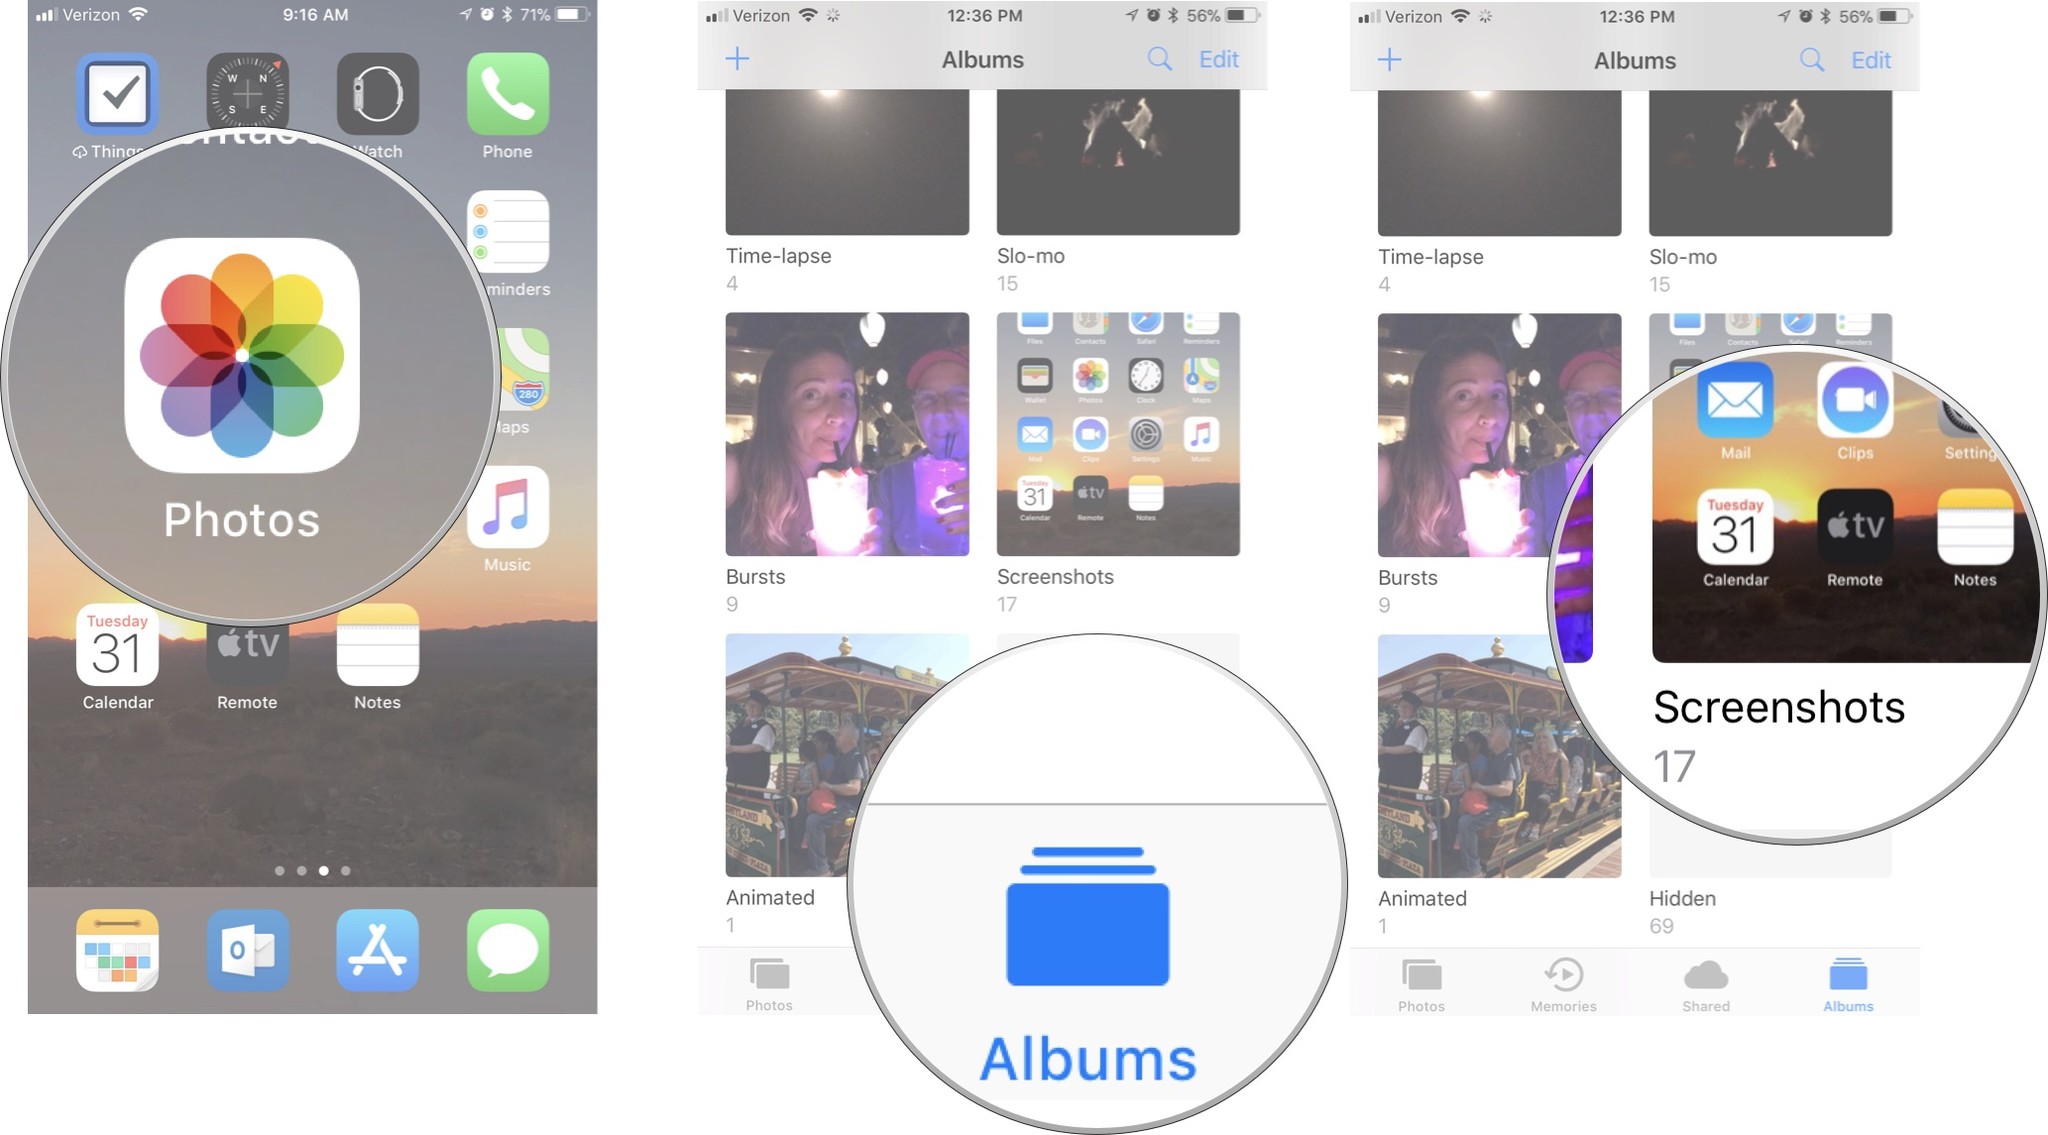 How to view and edit screenshots on iPhone by showing: Open Photos, then tap Albums, then tap Screenshots